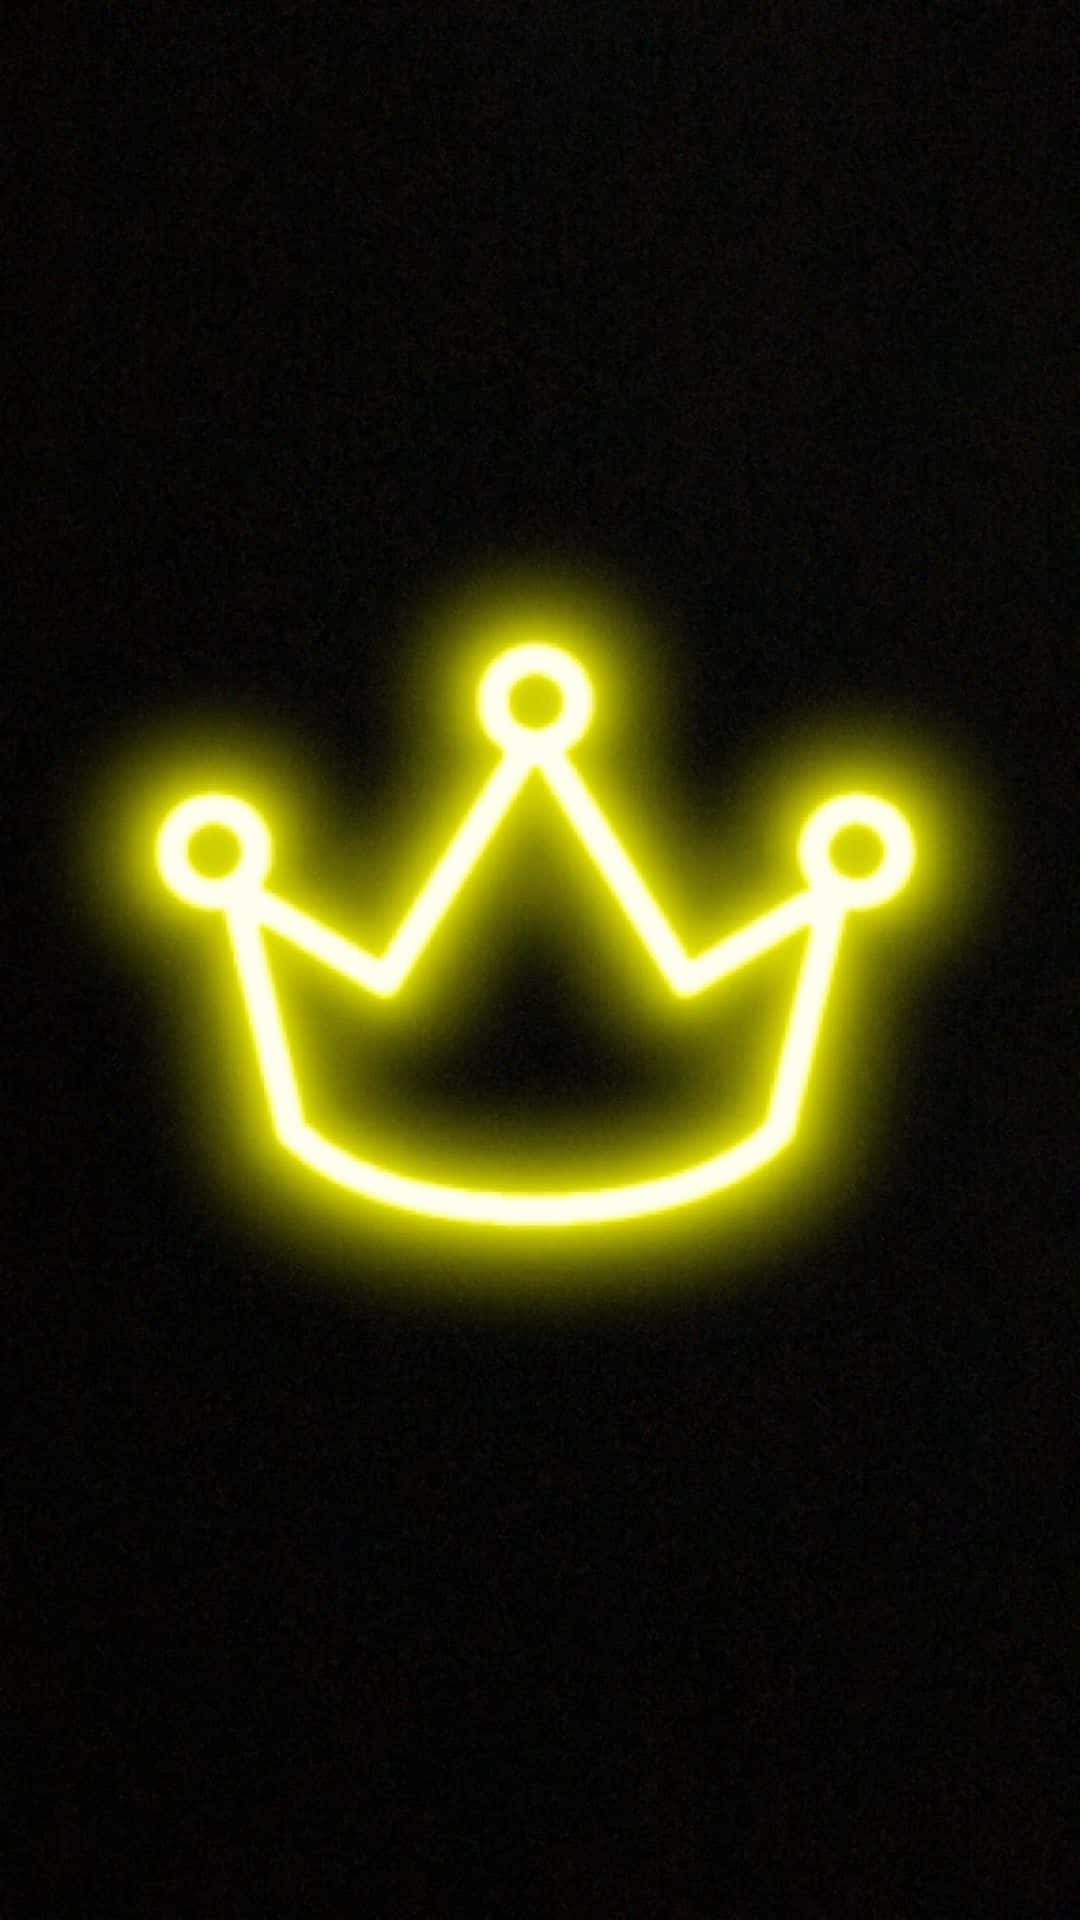 Download A Neon Crown On A Black Background Wallpaper | Wallpapers.com